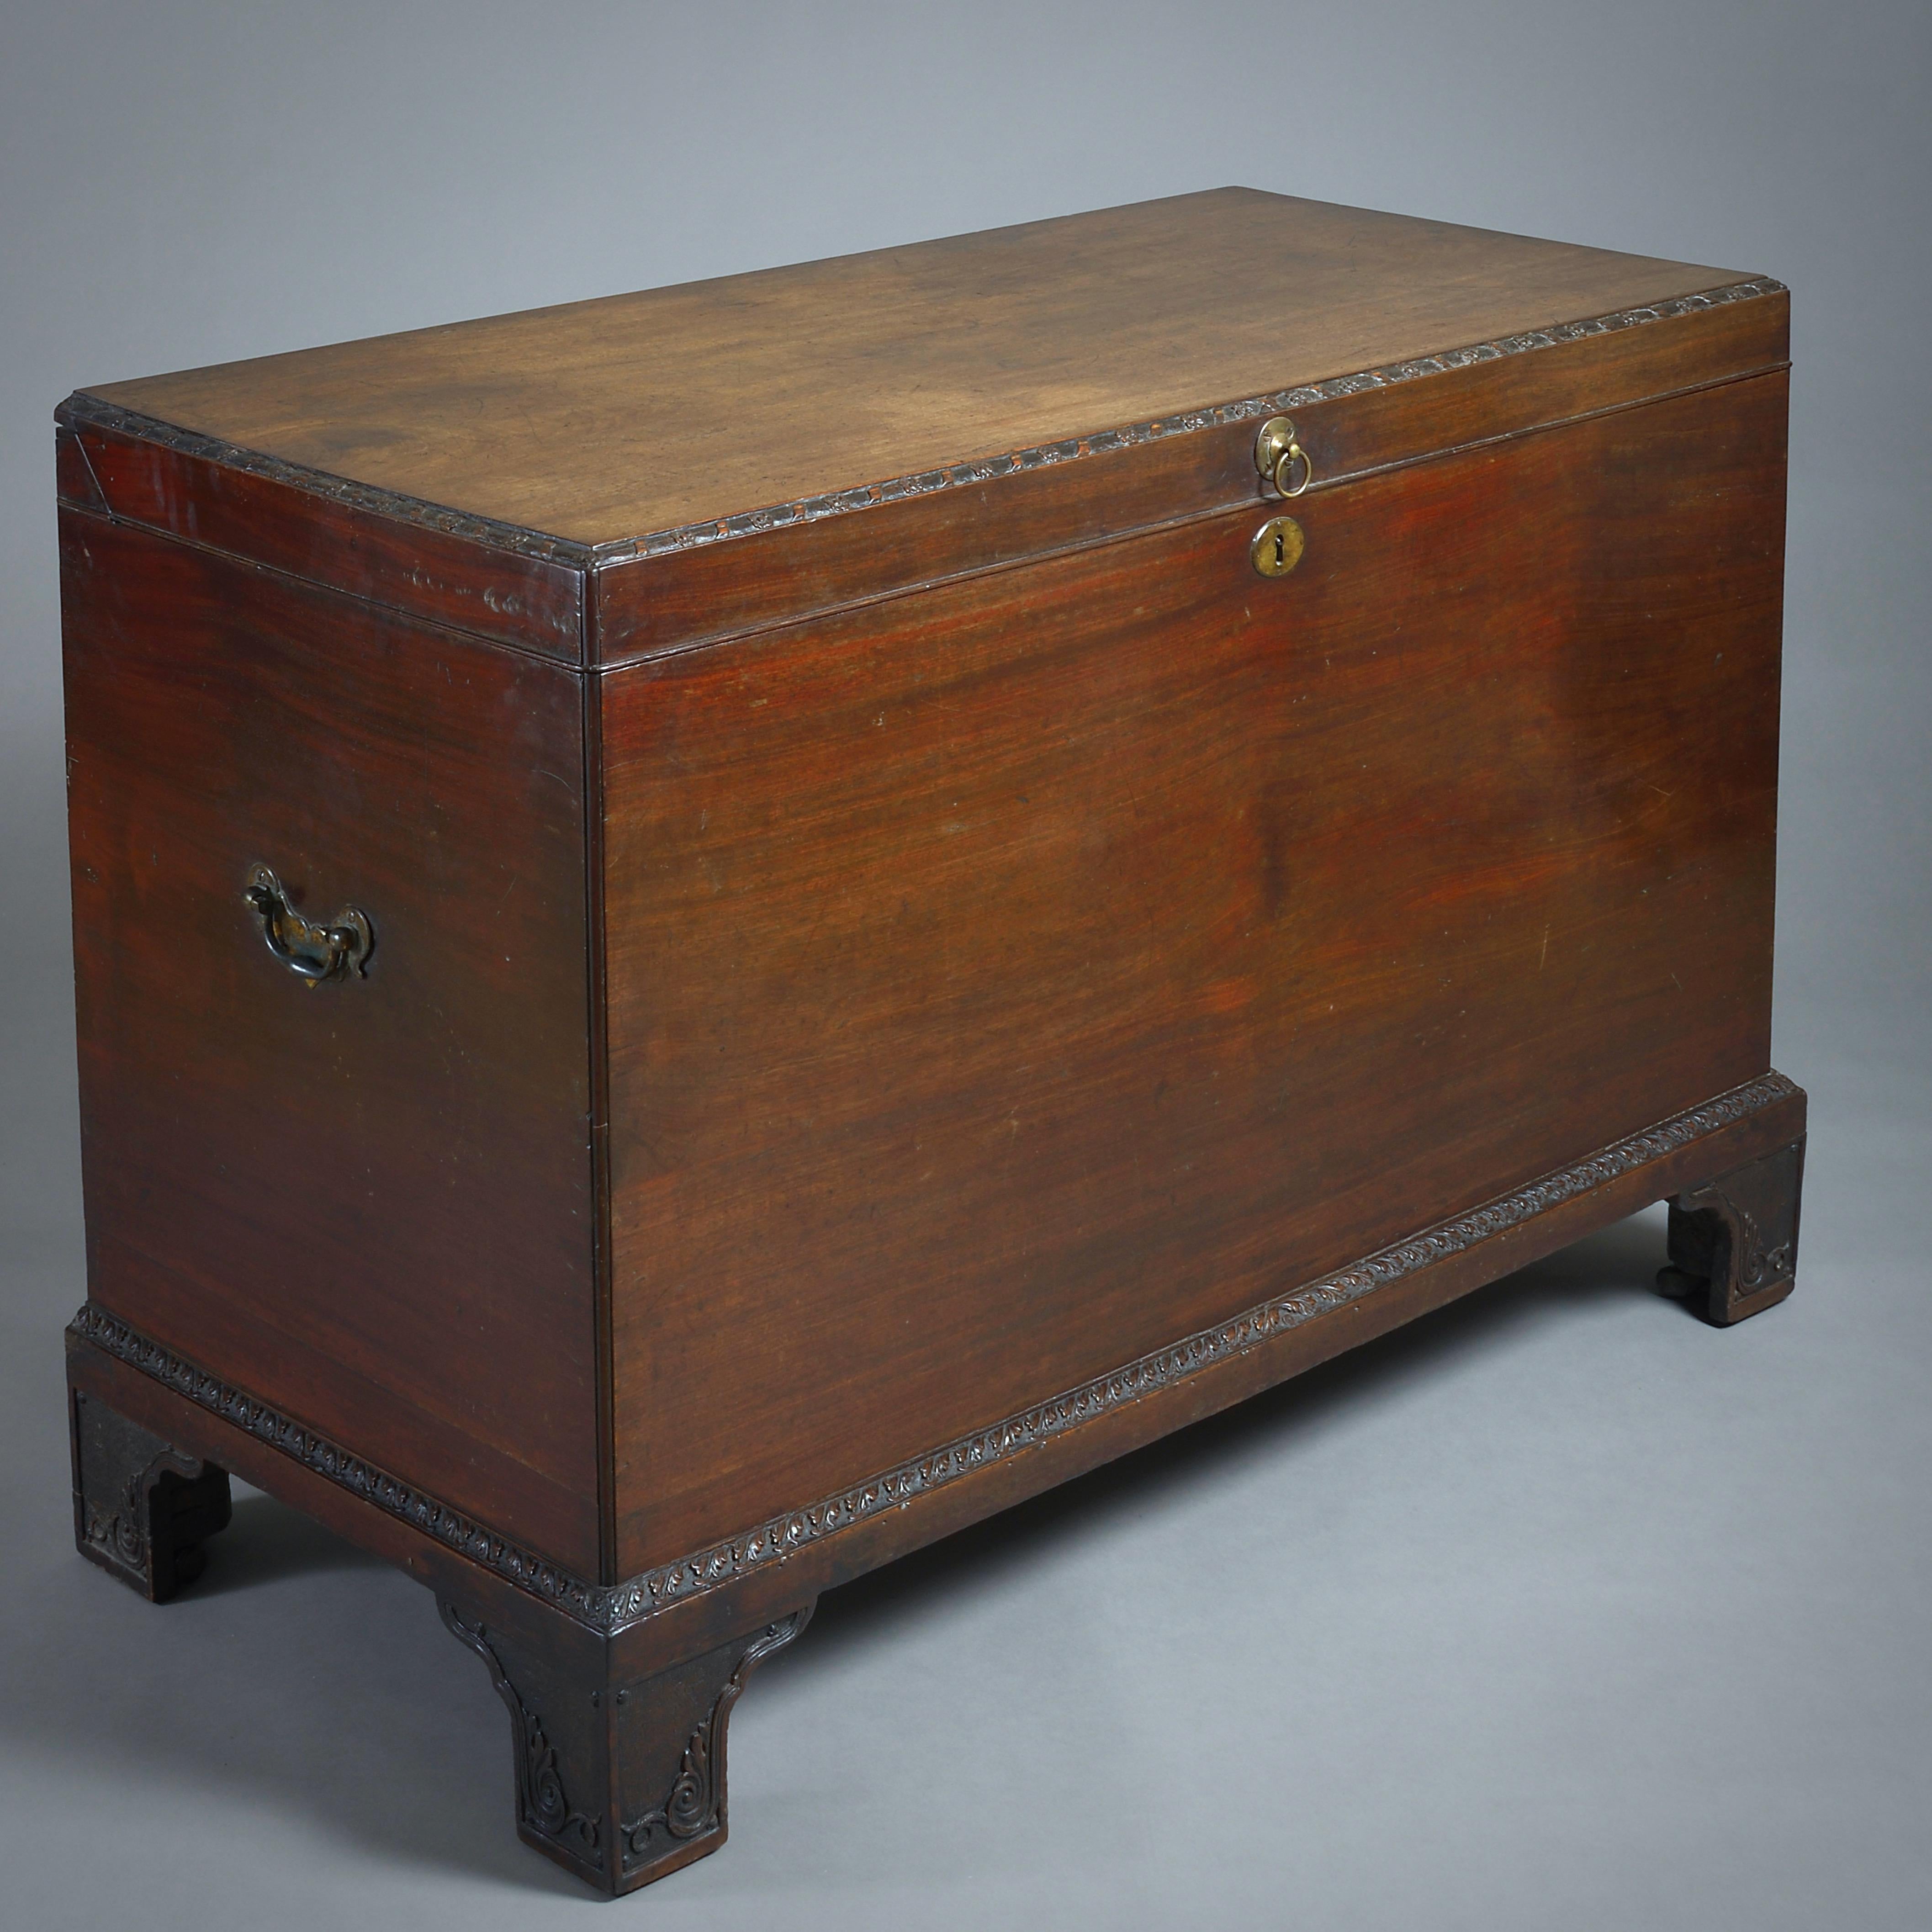 A FINE GEORGE II MAHOGANY CHEST, CIRCA 1740.

The hinged top with a ribbon and flower carved boarder. The base with a leaf-carved moulding on scroll and leaf-carved bracket feet. Original brass carrying handles.